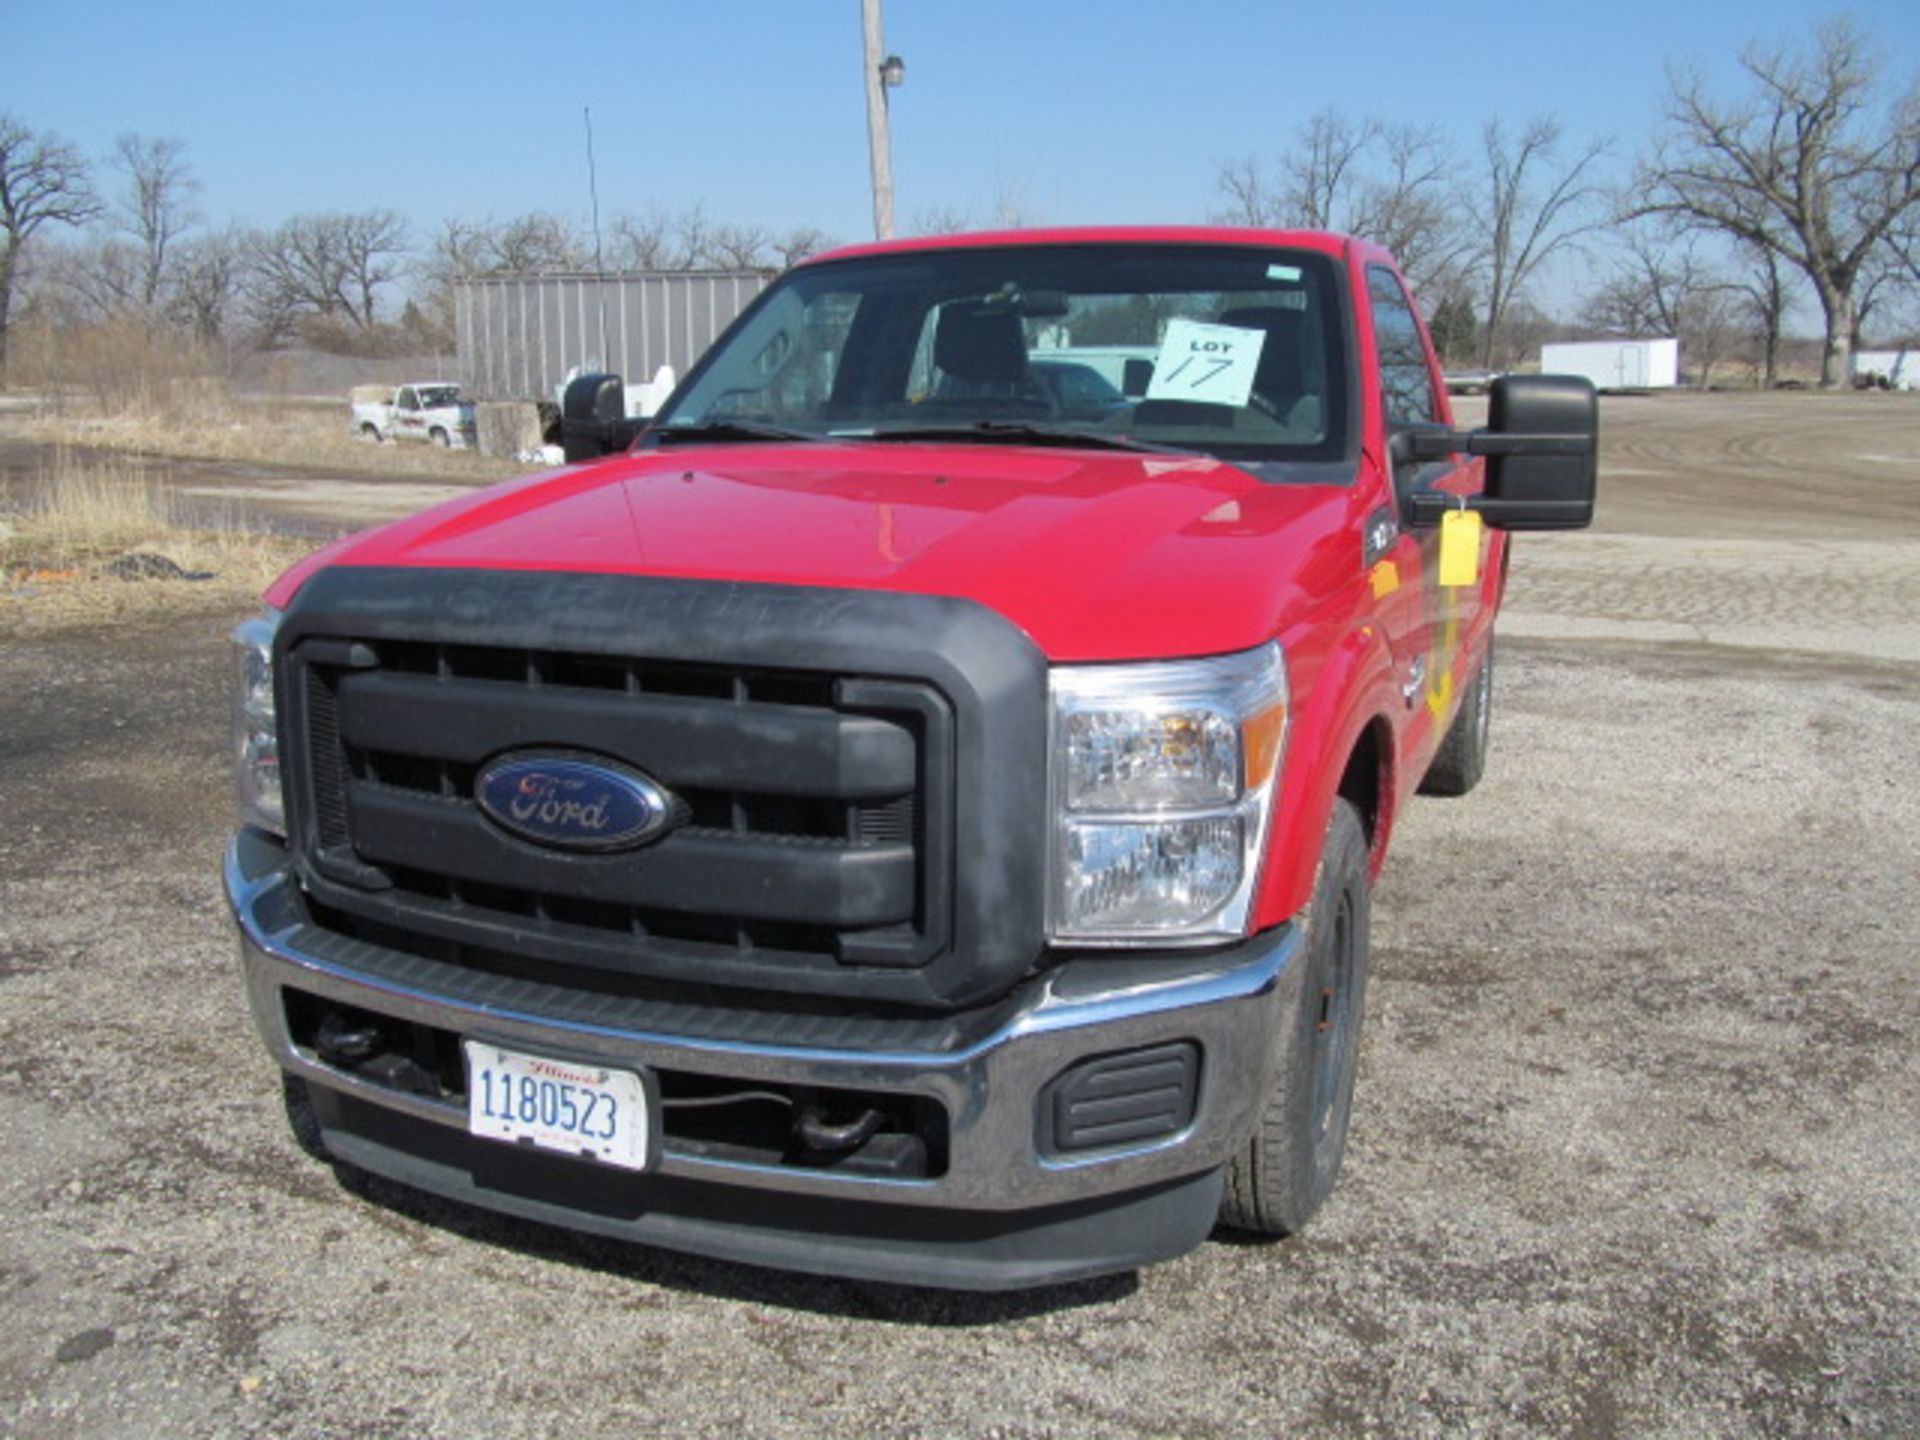 2014 Ford F250 Pickup Truck (VIN: 1FTBF2AT9EEA13237)[Estimated Mileage: 115,149] (Subject To - Image 2 of 4